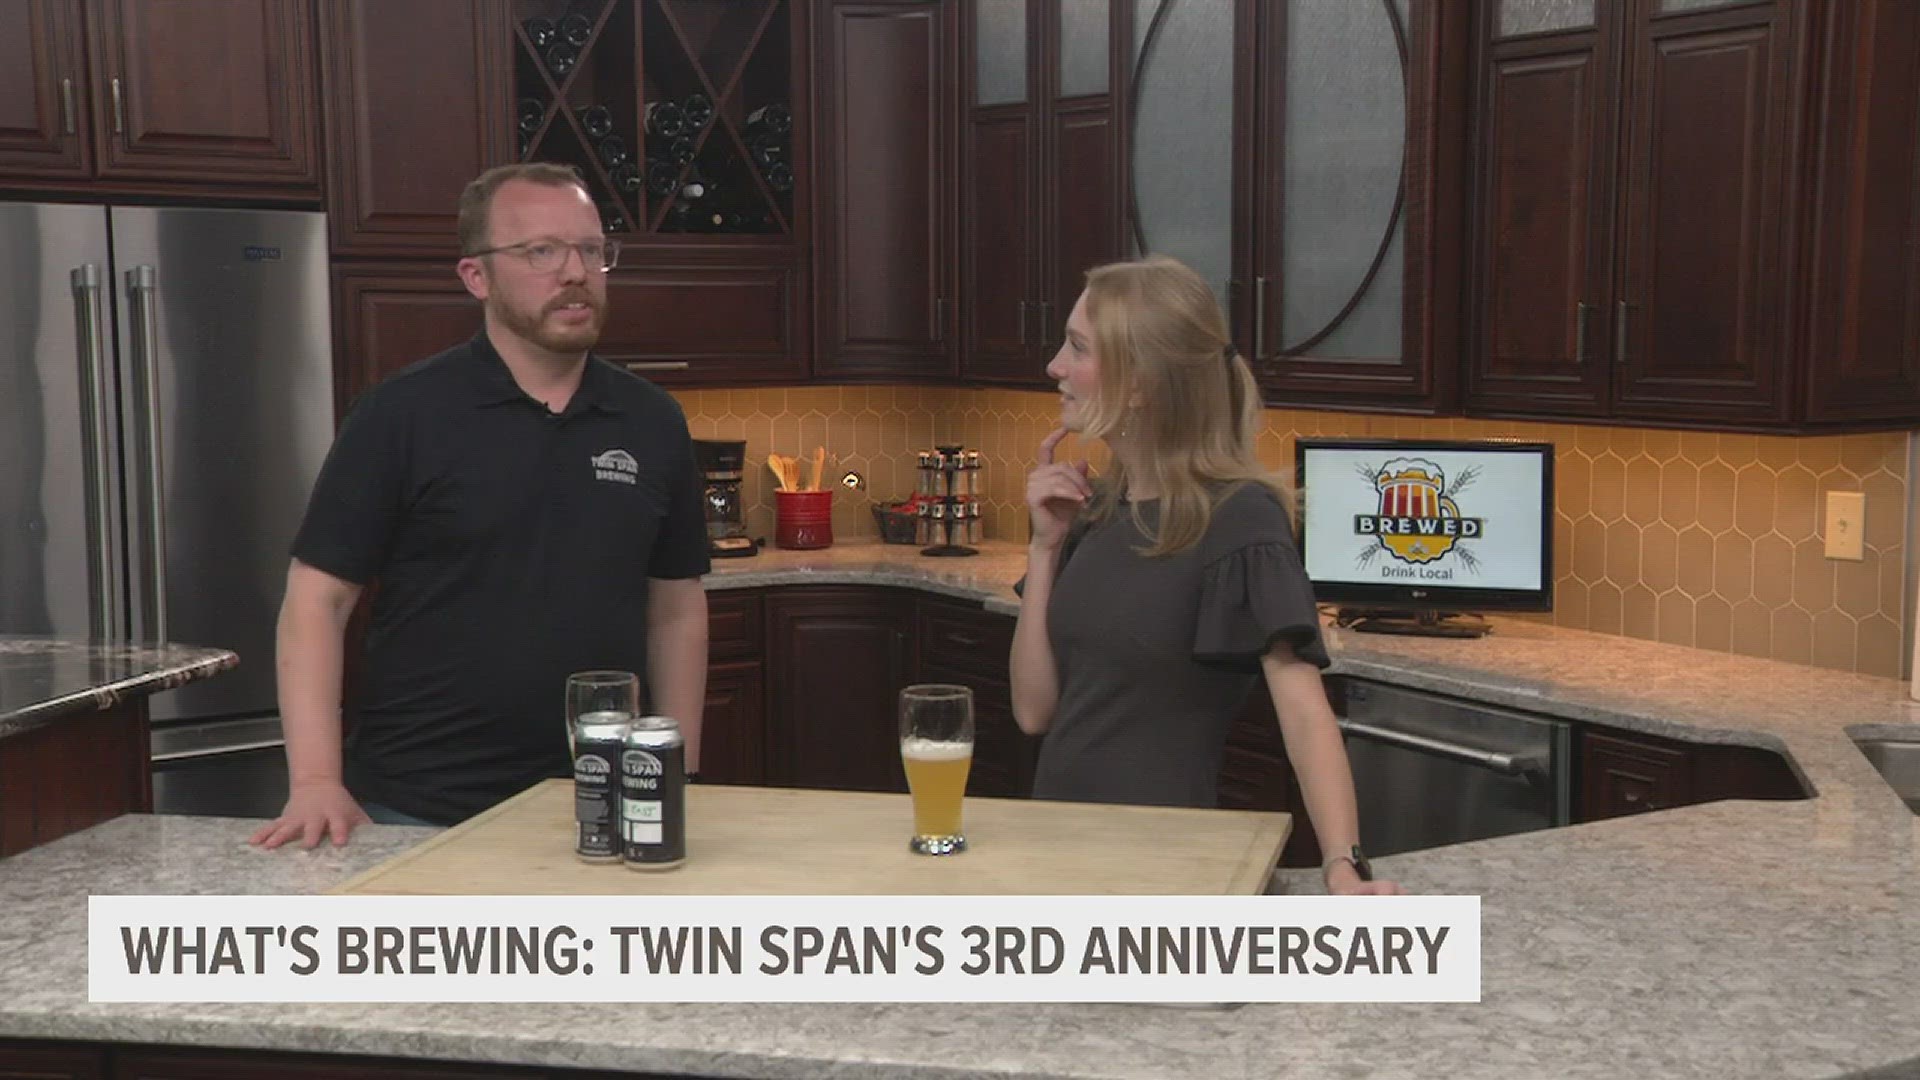 Twin Span Brewing is celebrating its anniversary with events throughout the month of May. Plus, a brand new IPA that incorporates the number "3" in more ways than 1.